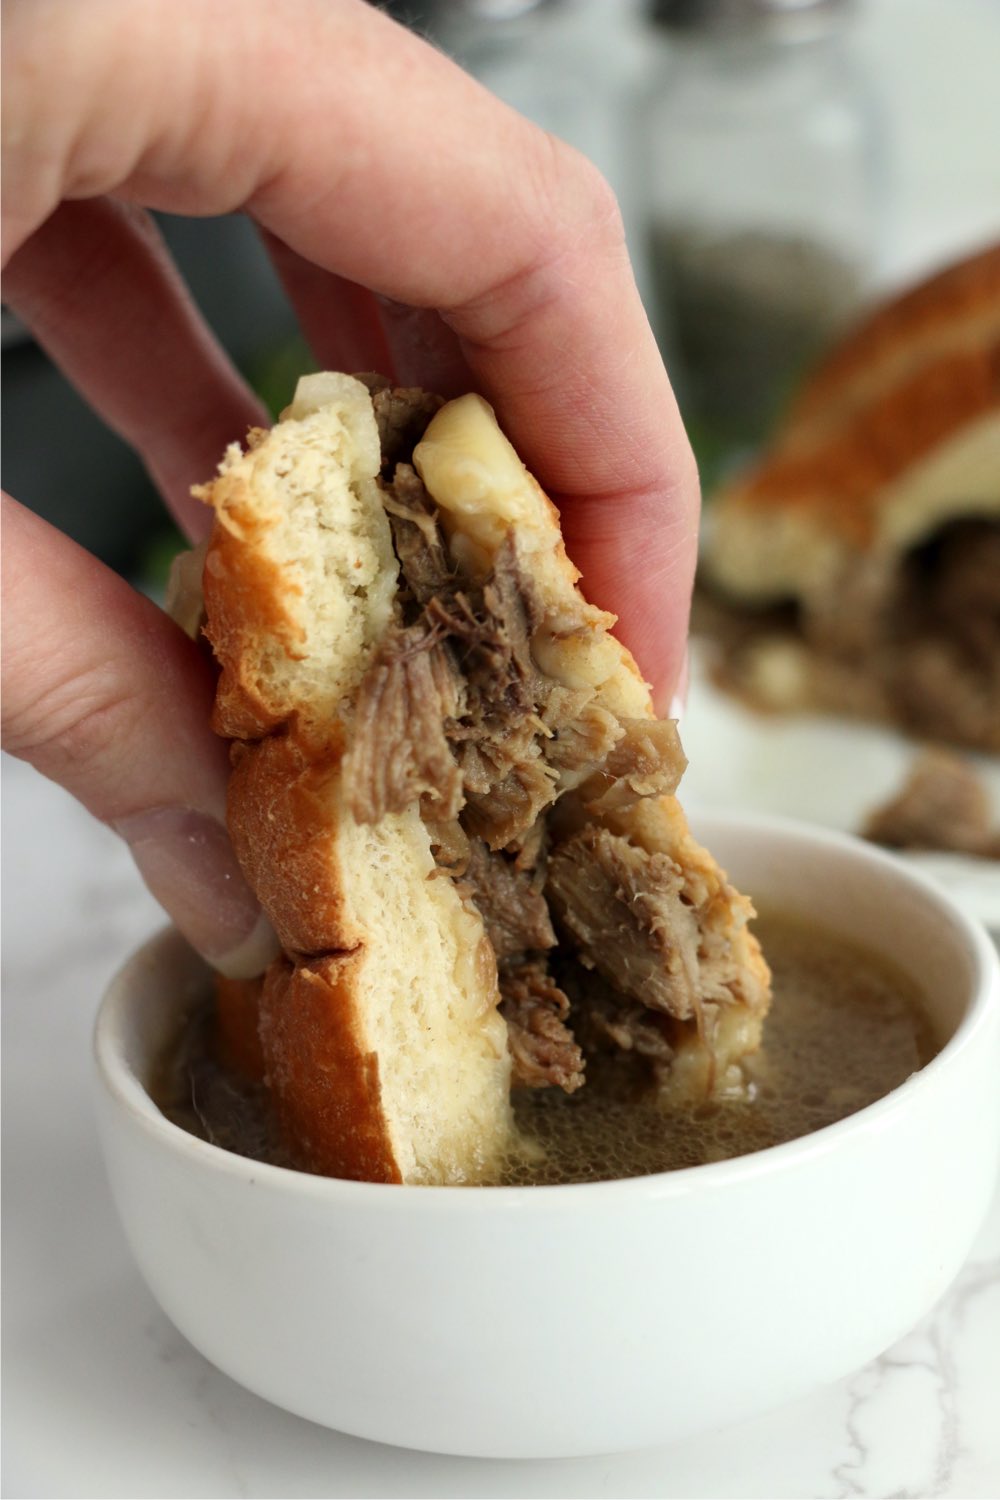 dipping sandwich into au jus